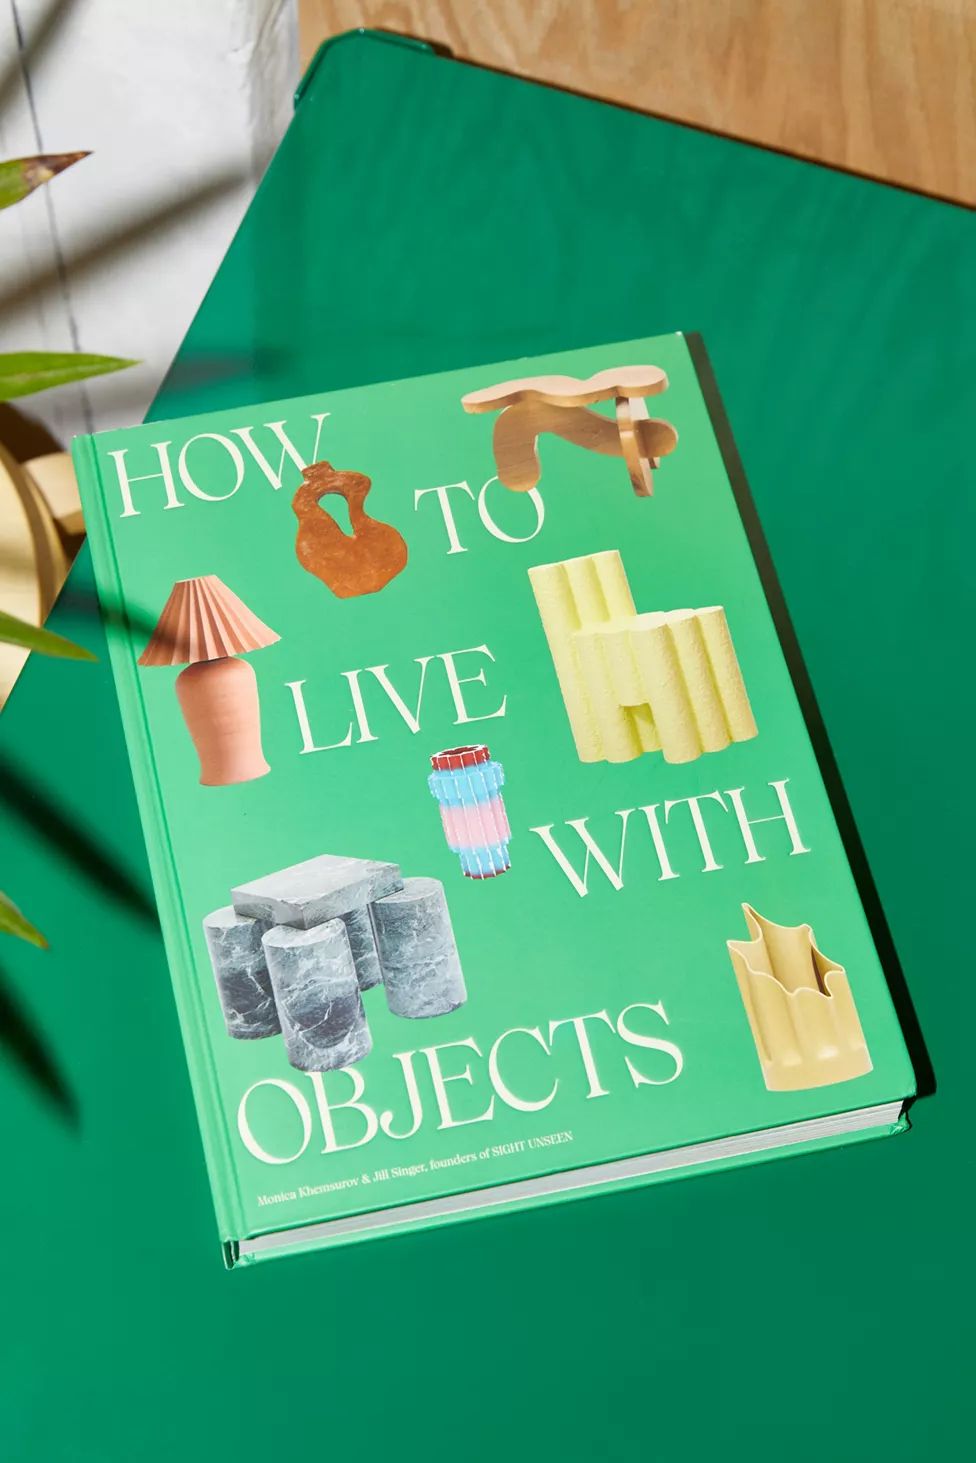 How To Live With Objects: A Guide To More Meaningful Interiors By Monica Khemsurov & Jill Singer | Urban Outfitters (US and RoW)